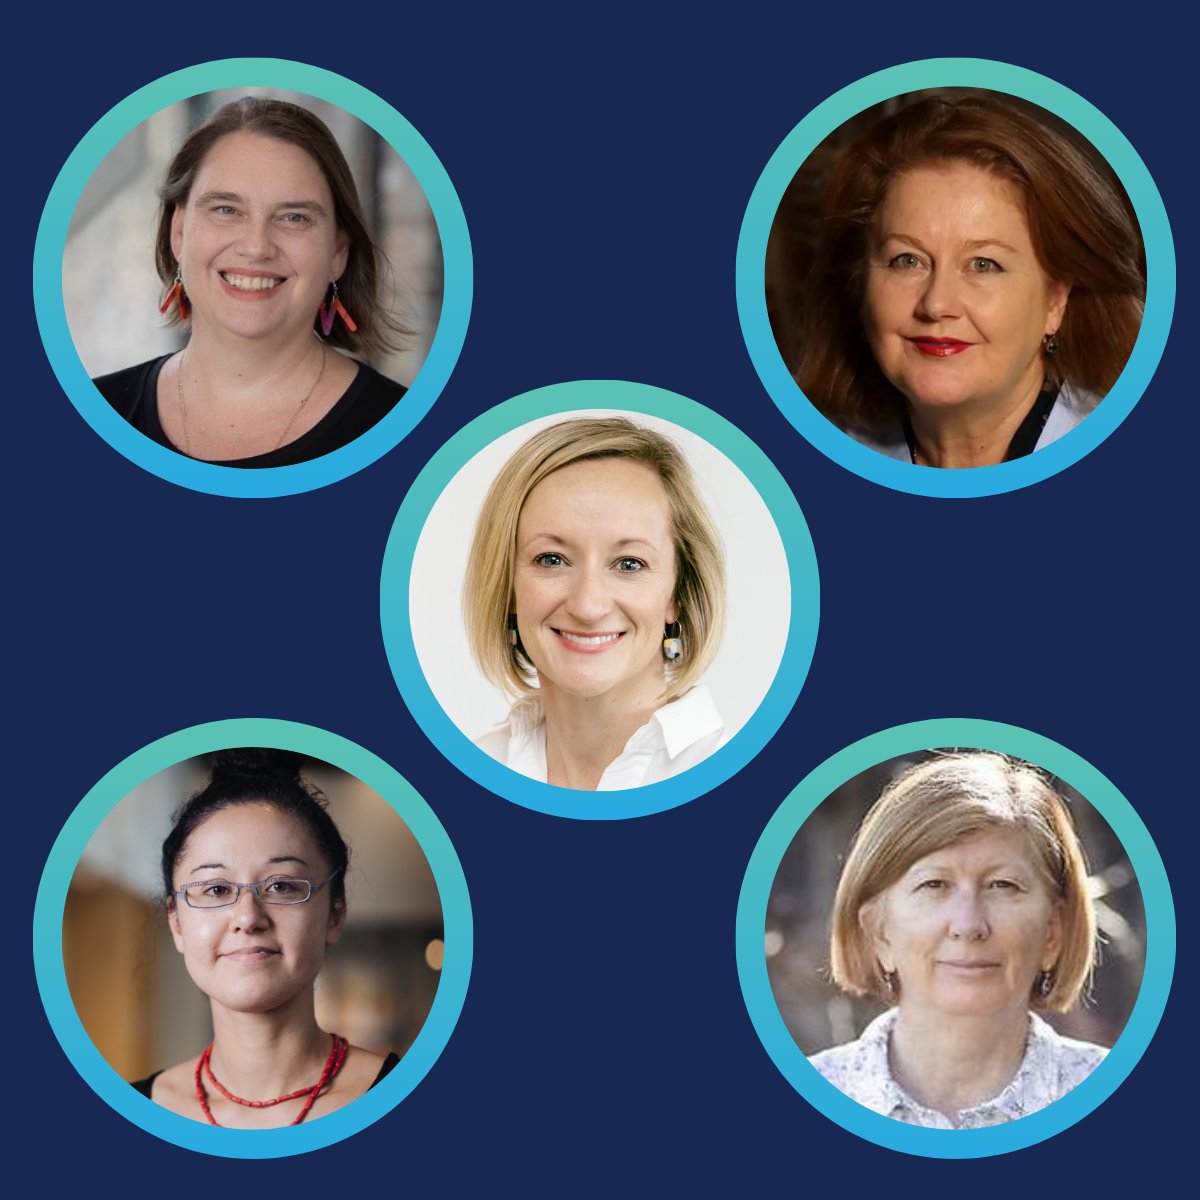 📢 Join the NSW Smart Sensing Network's Women in Sensing event at the University of Wollongong for a fascinating panel discussion featuring women leaders in #sensing technology. 💡 When: Thurs 30 May, 2-4pm Where: @iaccelerate open space, @UOW Register: events.humanitix.com/women-in-sensi…